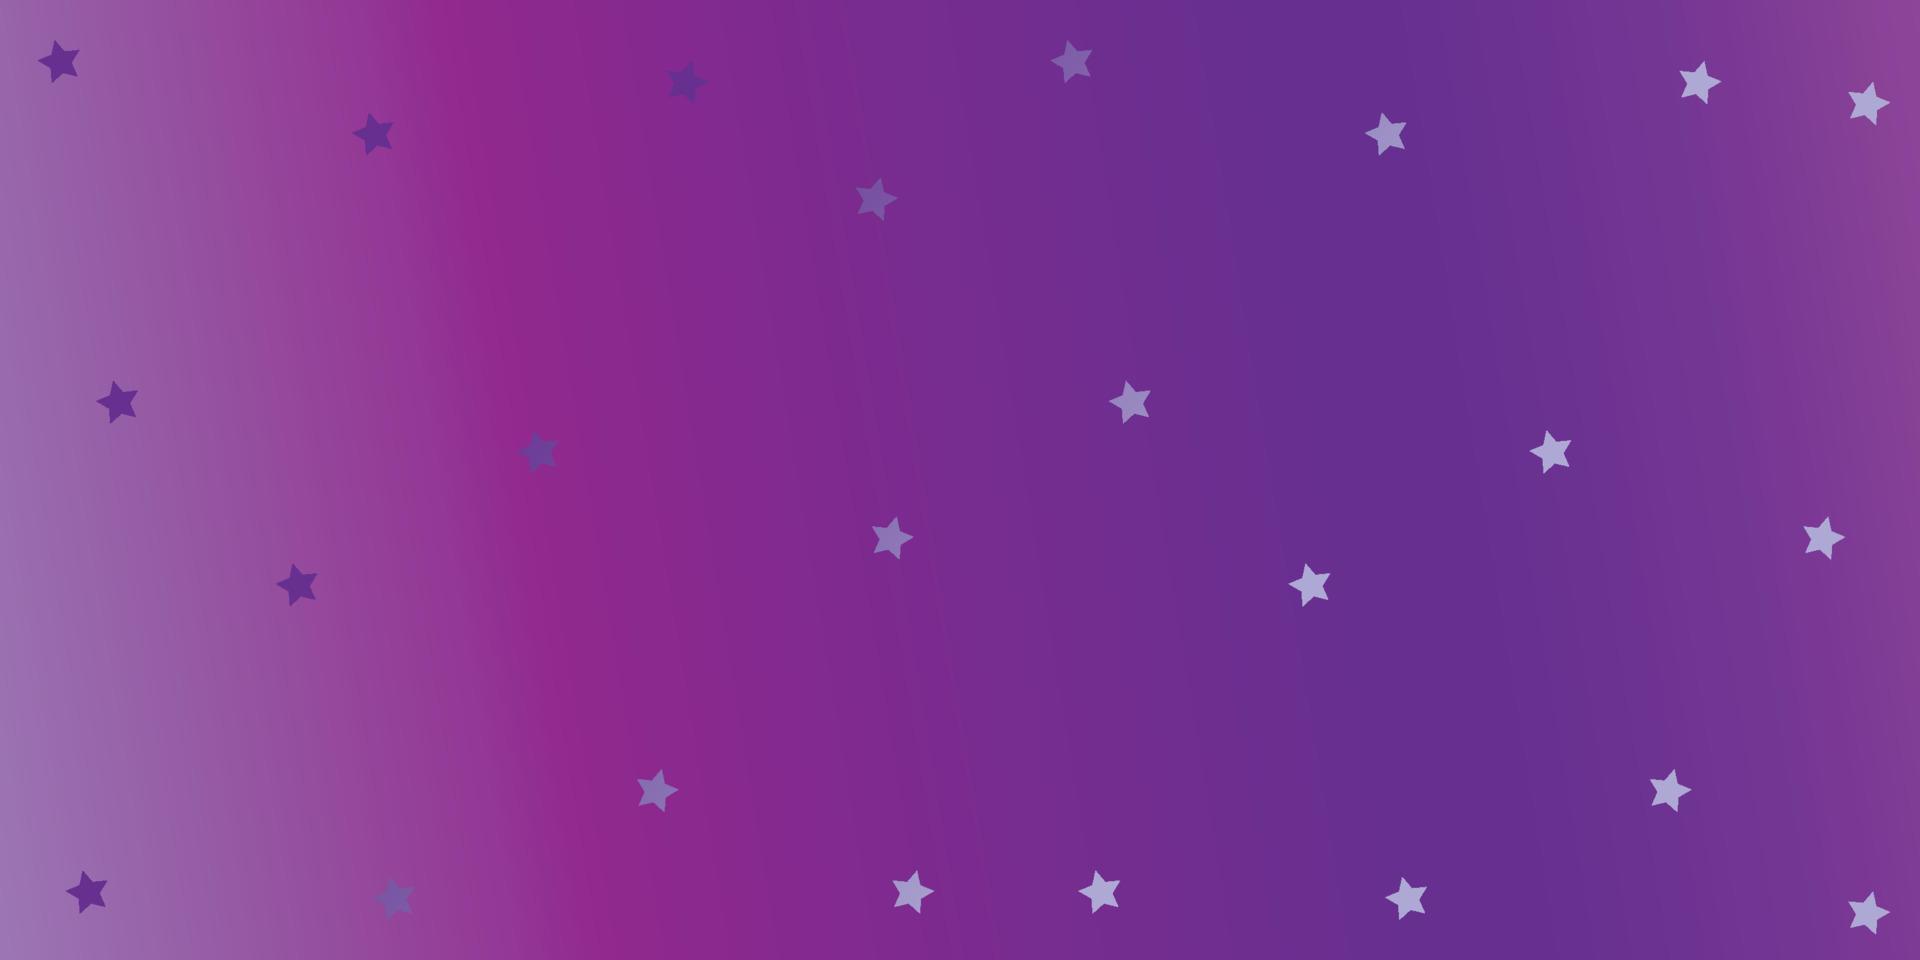 Colorful blur light purple with stars vector backdrop. Abstract illustration with gradient blur design. New design for applications.